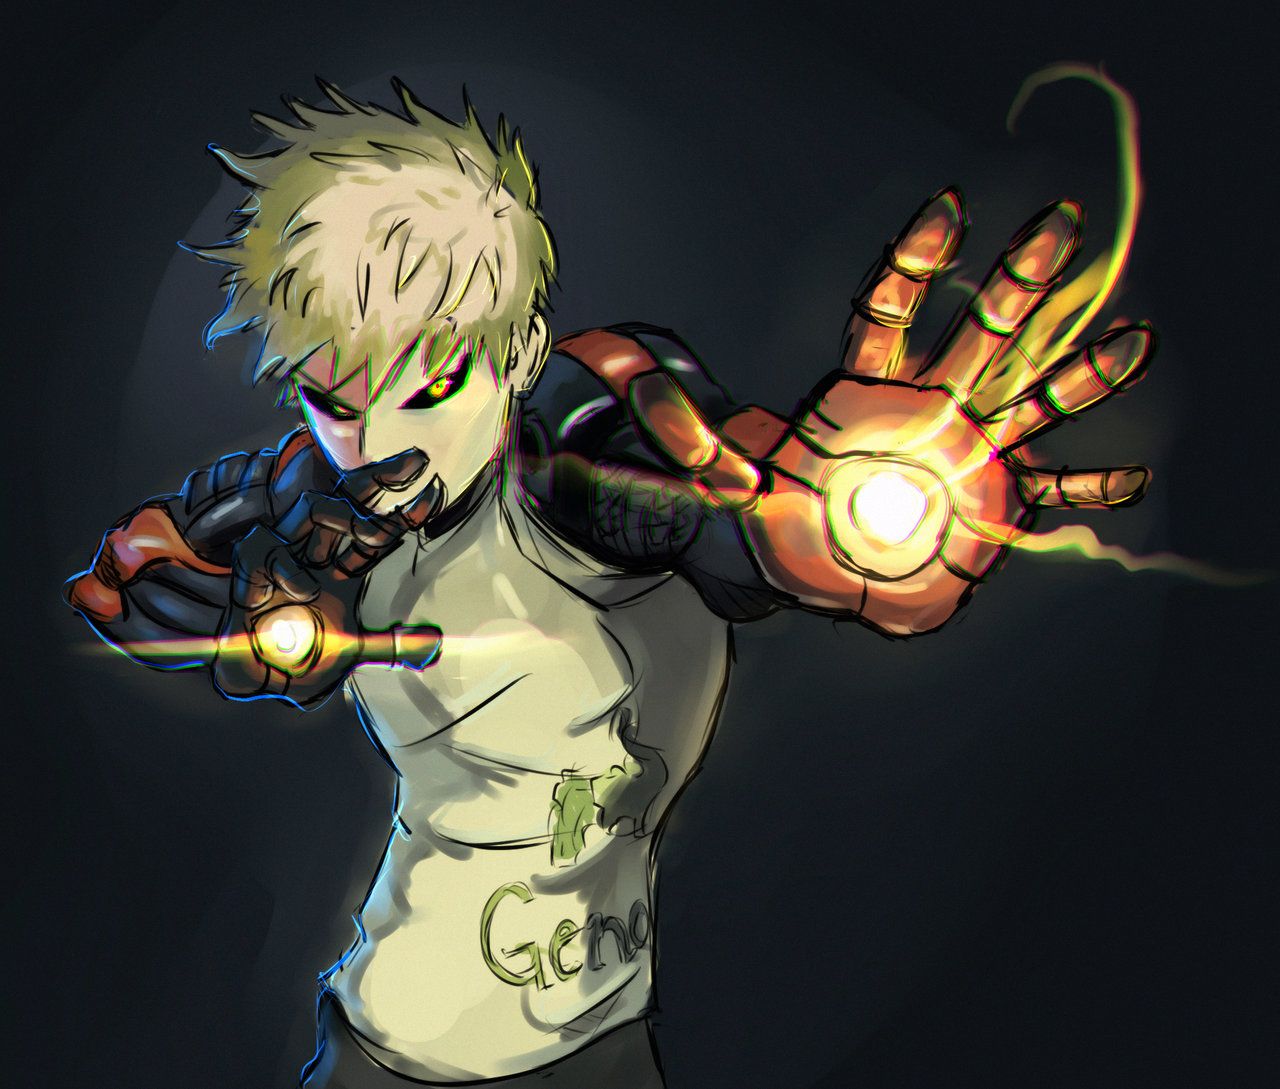 1280x1089 Free Download One Punch Man Genos Wallpaper Pc 6376 Hd Wallpaper Site 1280x1089 For Your Desktop Mobile Tablet Explore One Punch Man Desktop Wallpaper One Punch Man Wallpaper